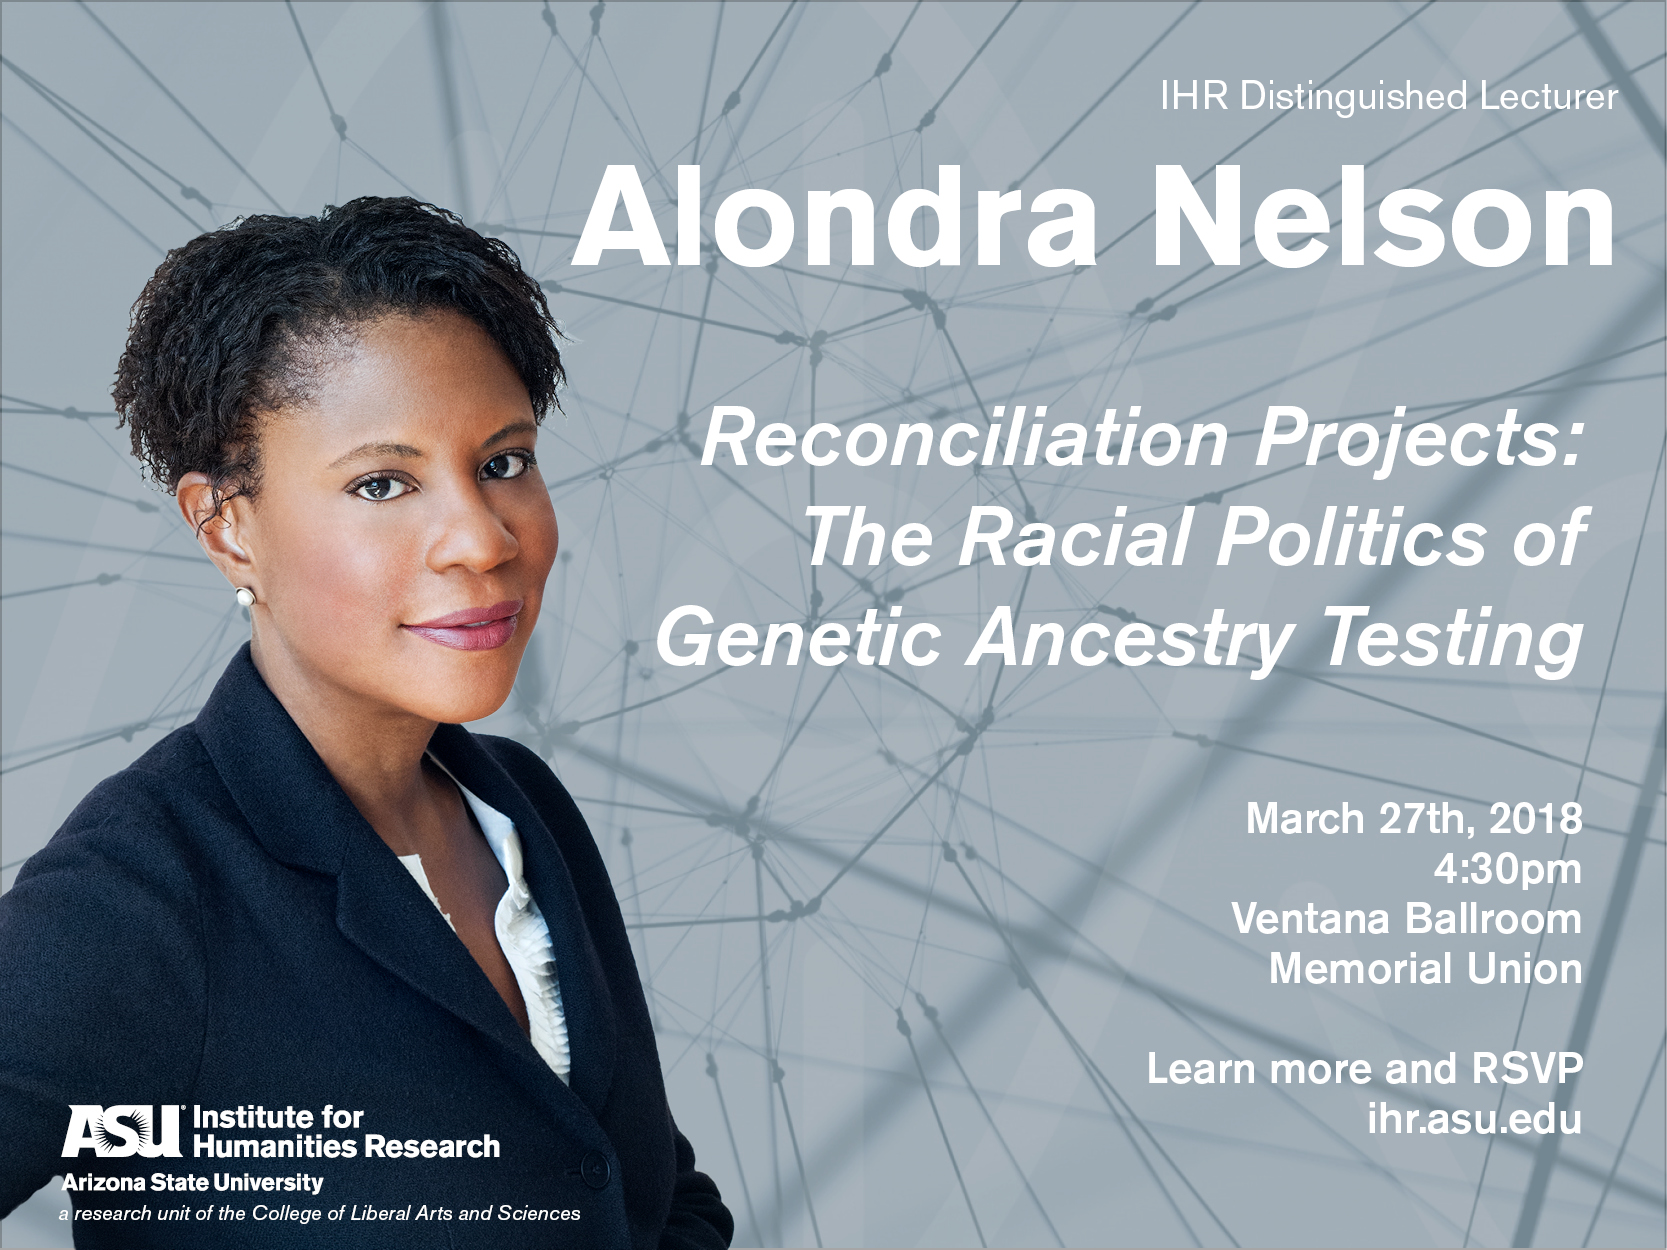 Alondra Nelson lecture flyer